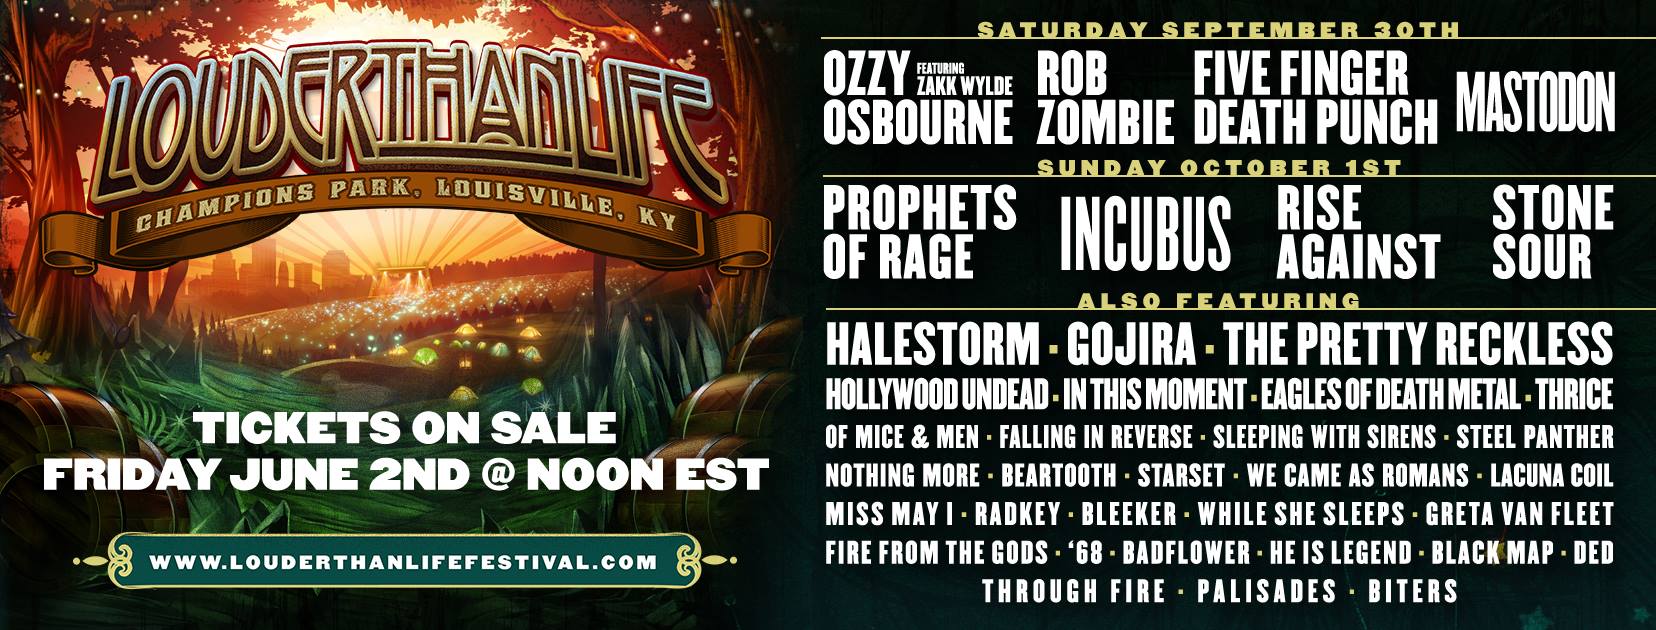 Louder Than Life Festival Lineup Announced with Ozzy Osbourne, Prophets